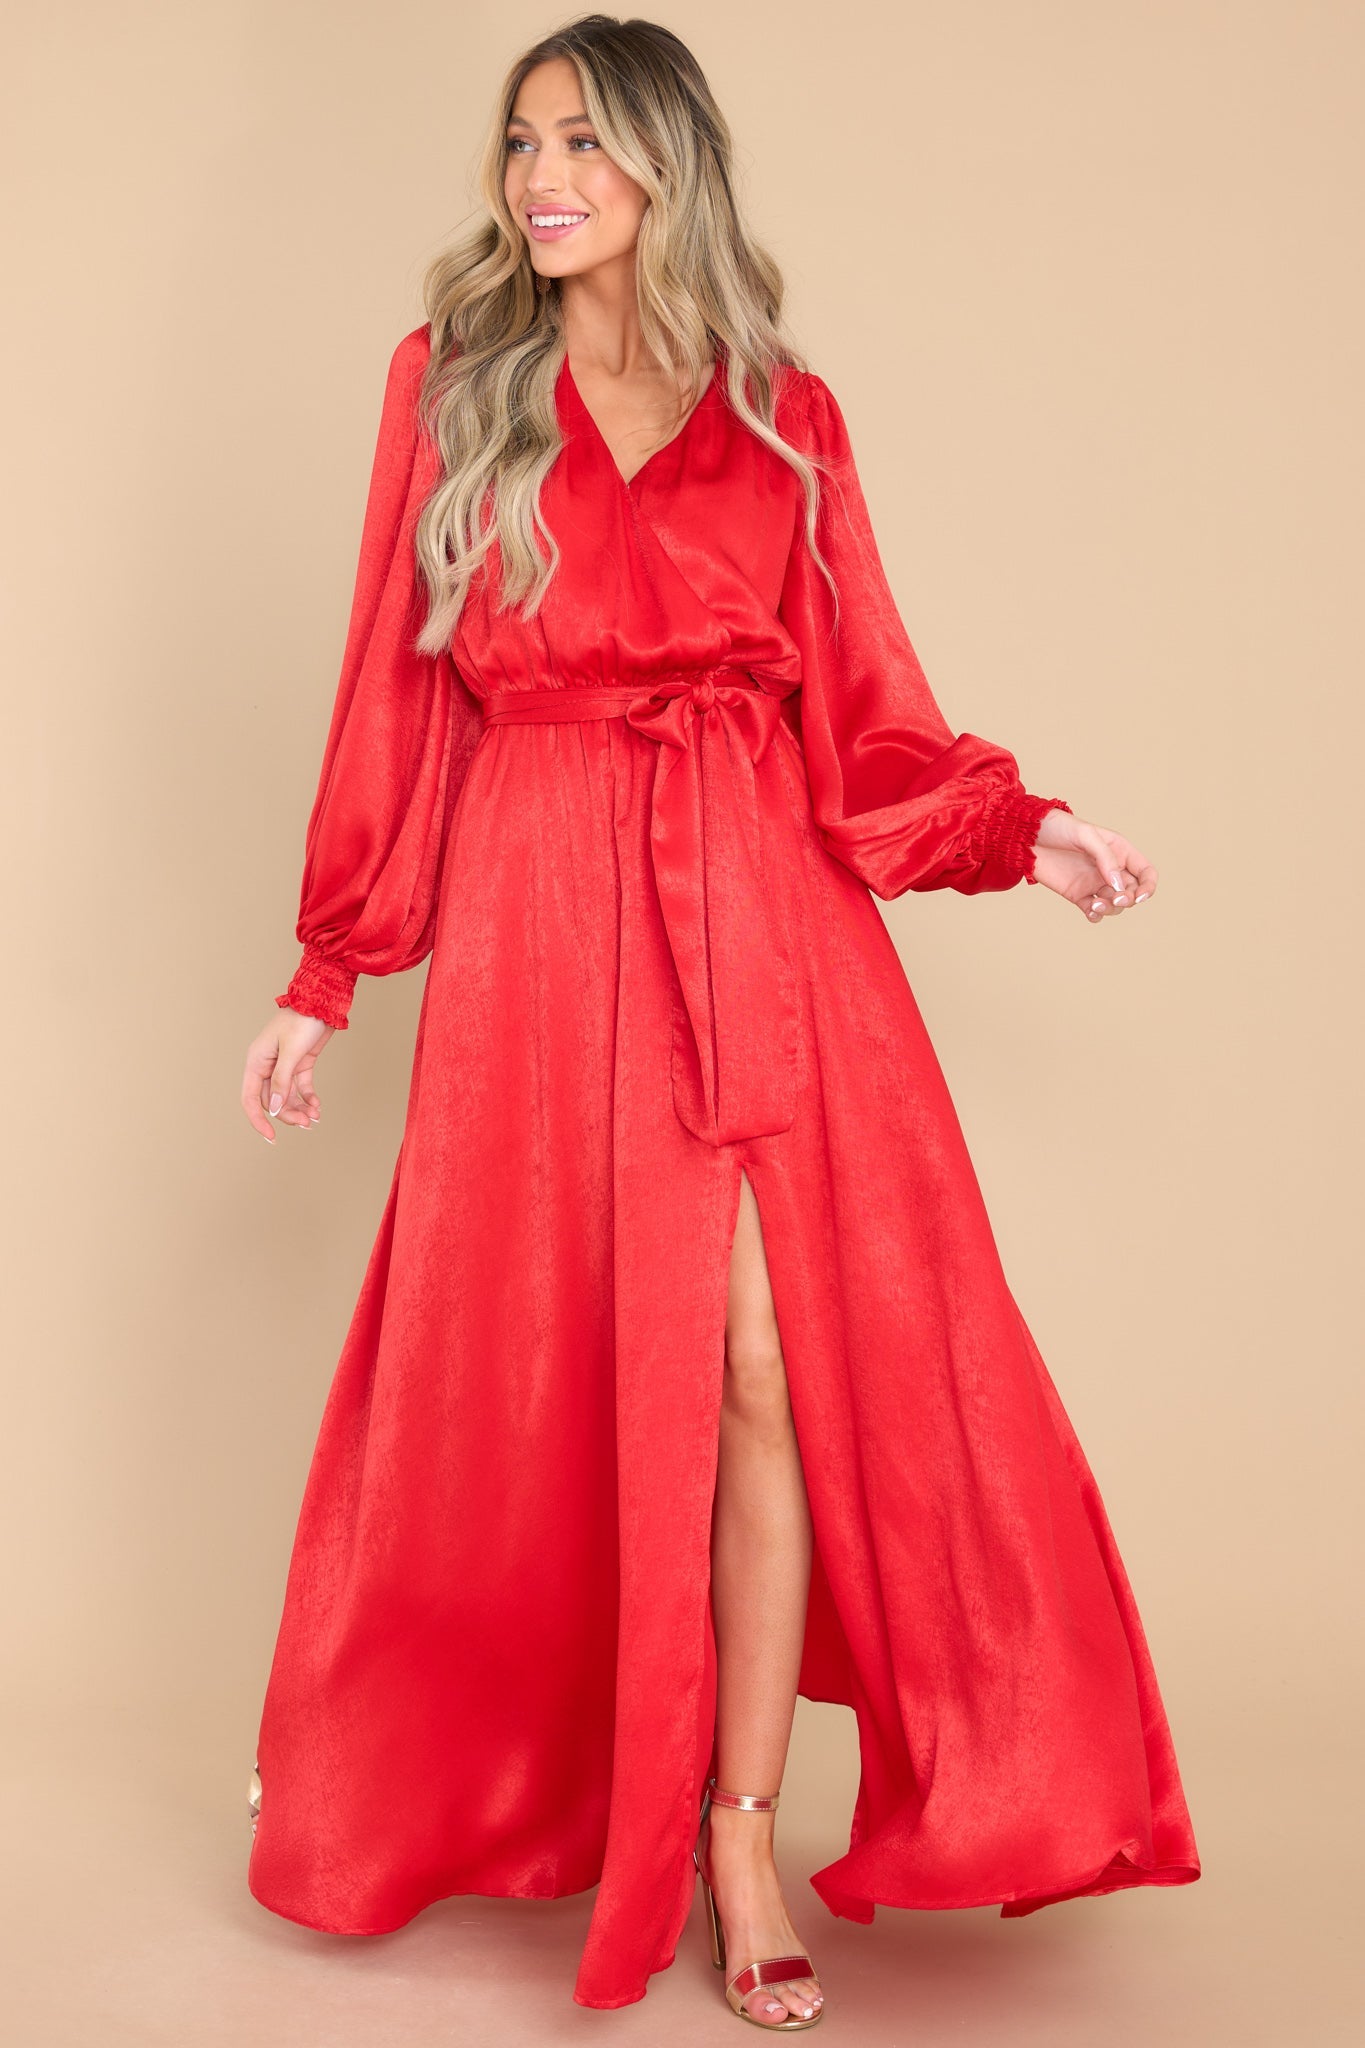 Red Full Sleeve Lace Double Bow Dress - A.T.U.N.